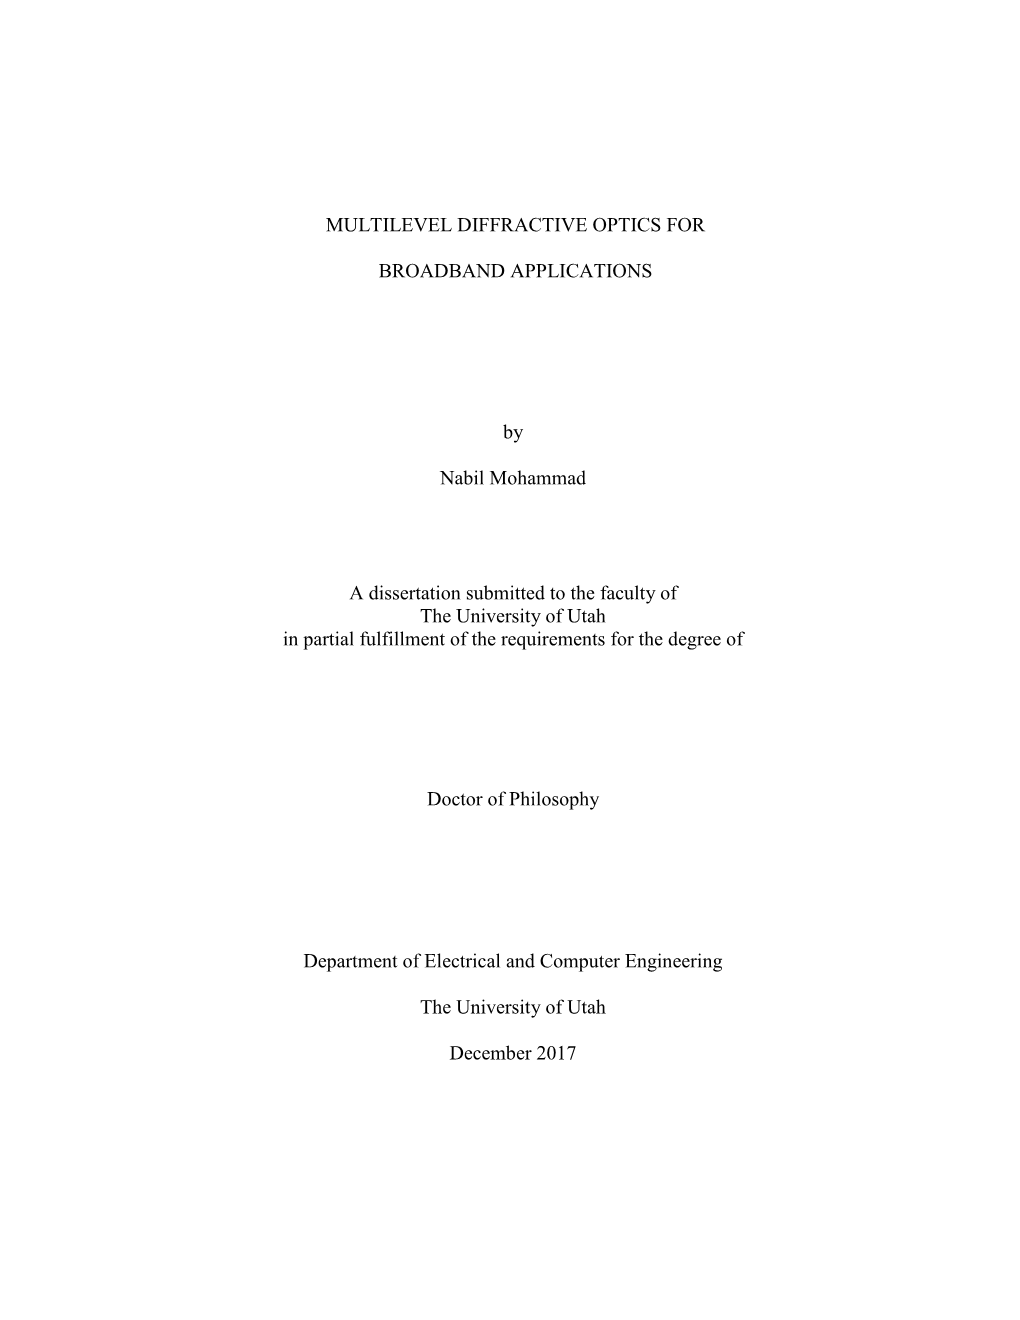 MULTILEVEL DIFFRACTIVE OPTICS for BROADBAND APPLICATIONS by Nabil Mohammad a Dissertation Submitted to the Faculty of the Univer